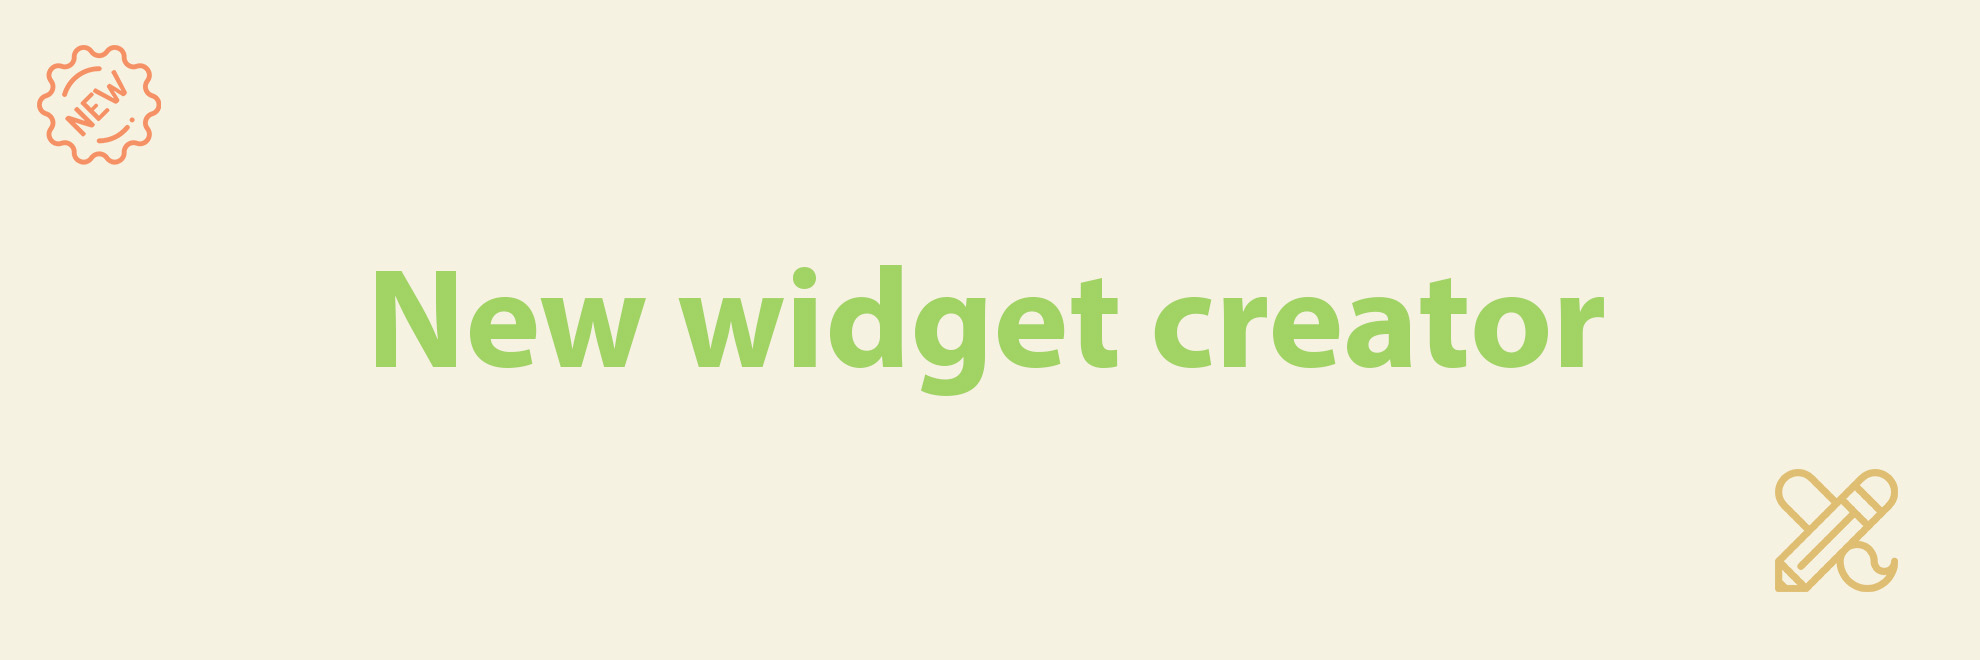 Illustration showing new widget creator text and two visual icons in the image corners.